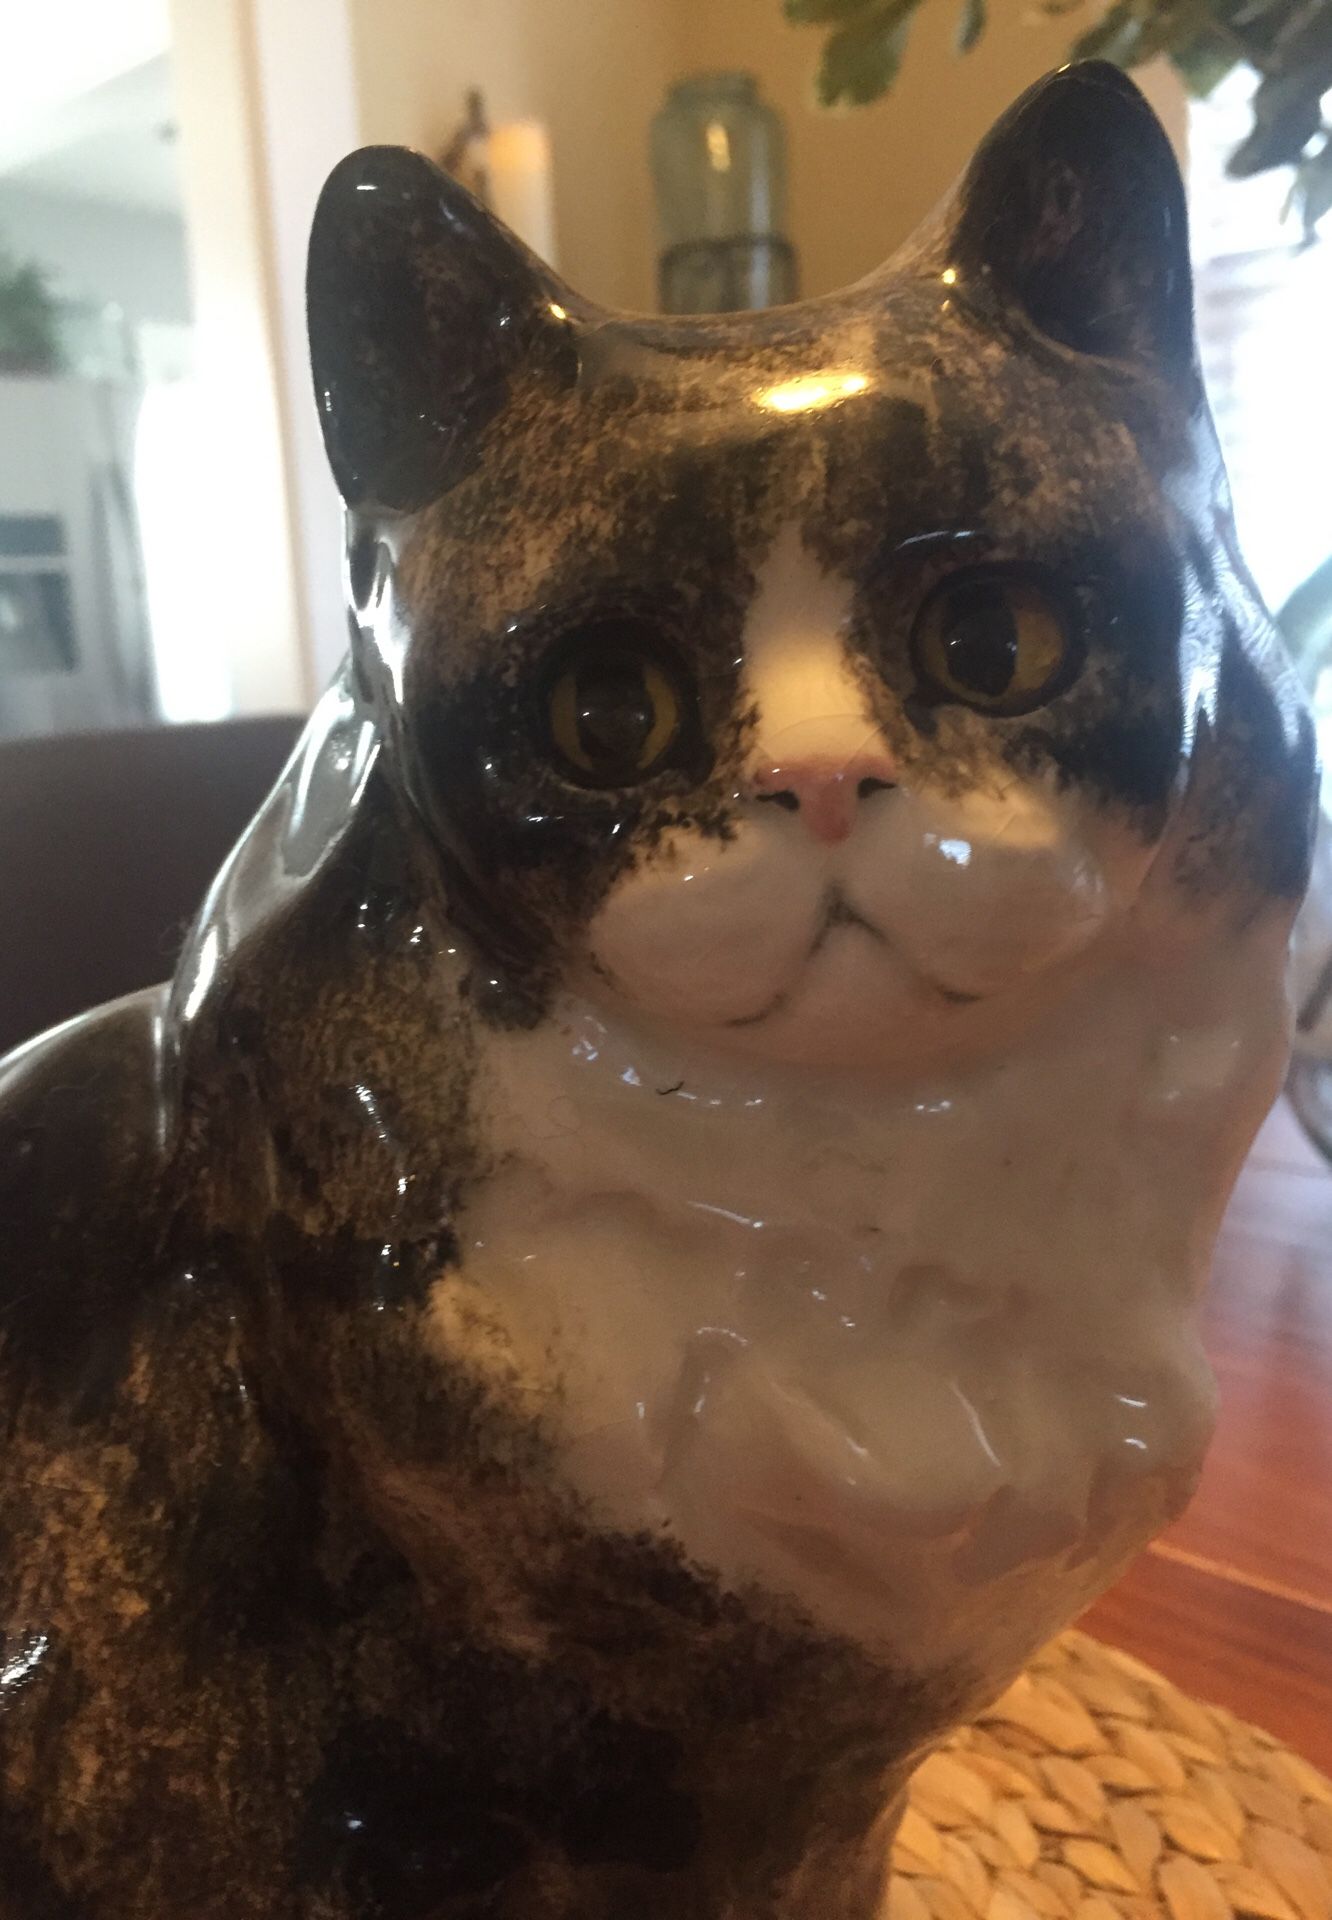 Ceramic Cat 12” tall Europeon WINSTANLEY #53 collectible (one of a kind)